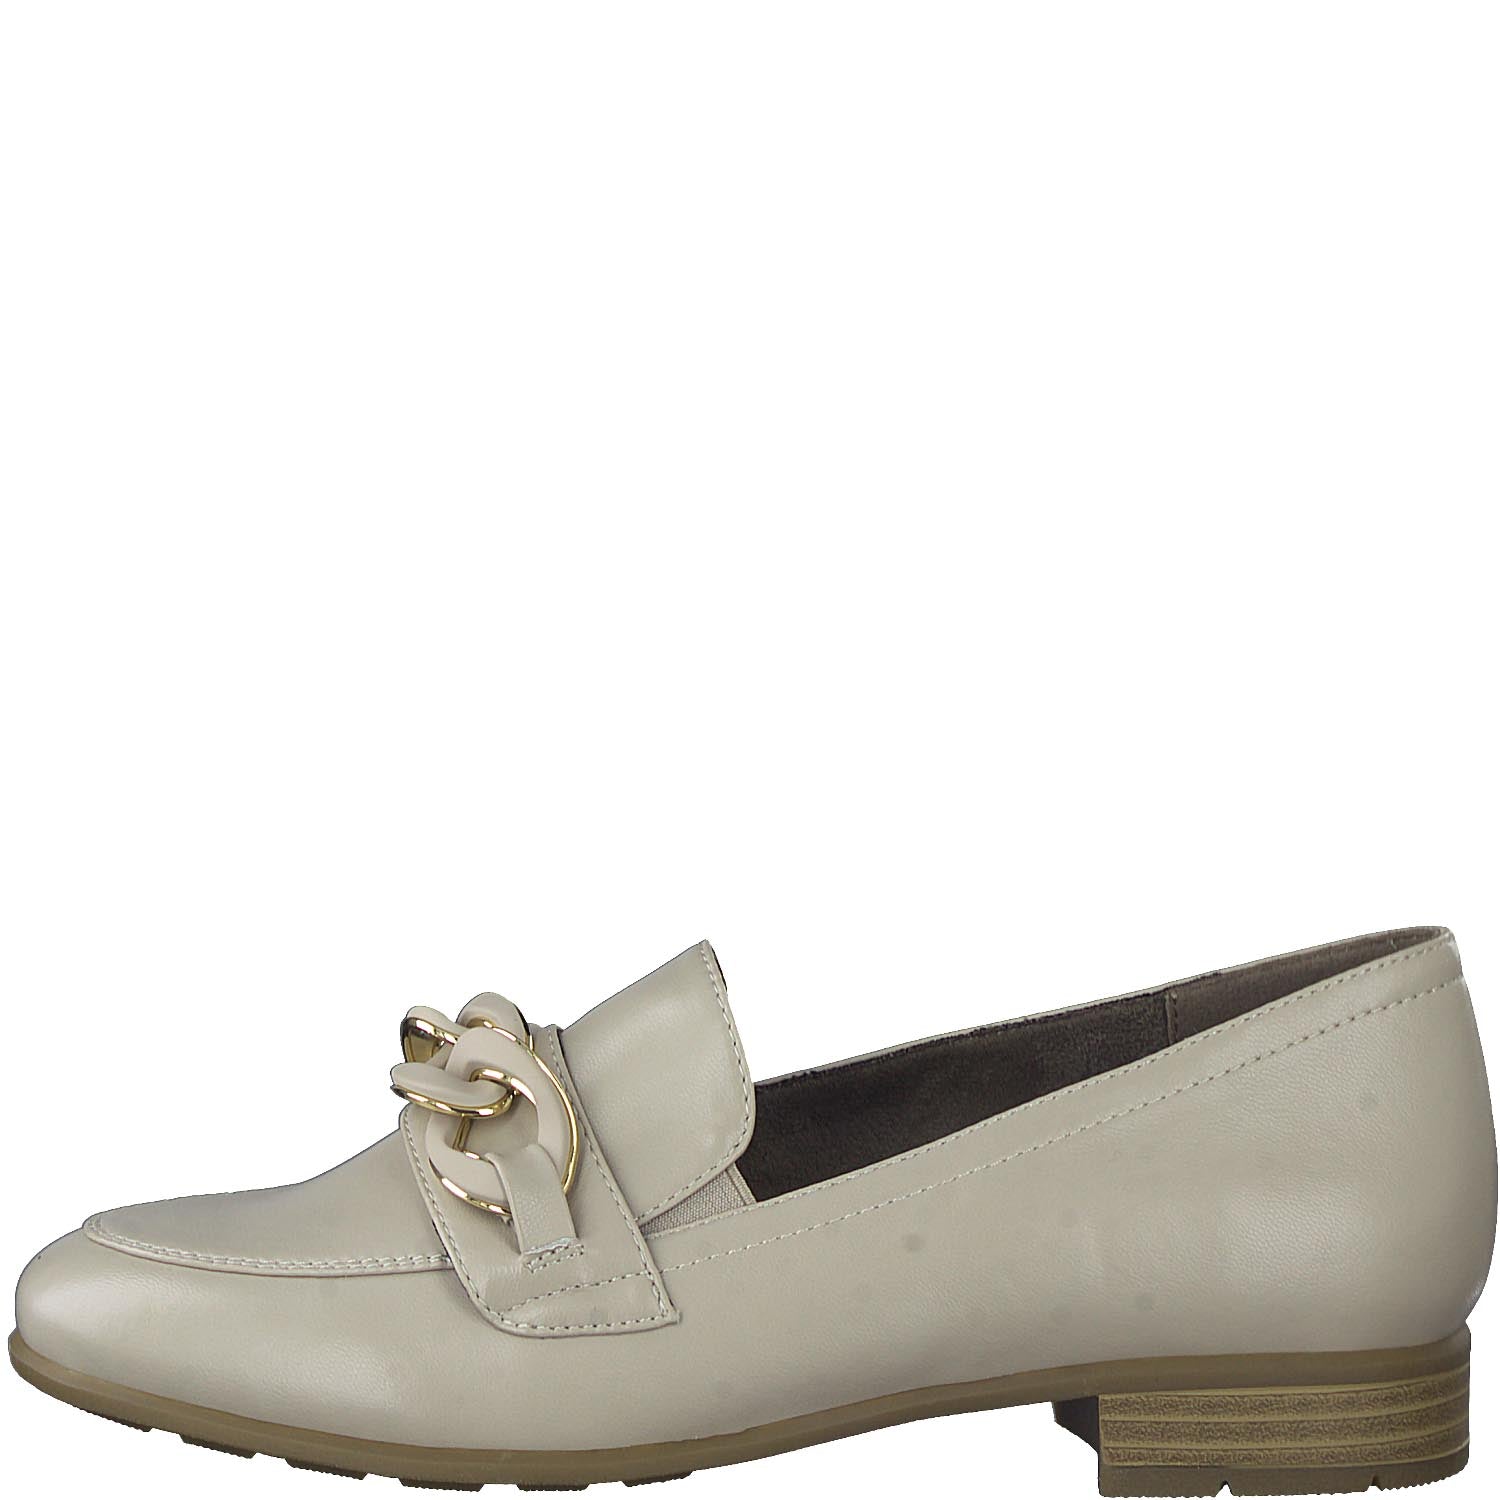 Front view of Jana beige loafer with chain link.